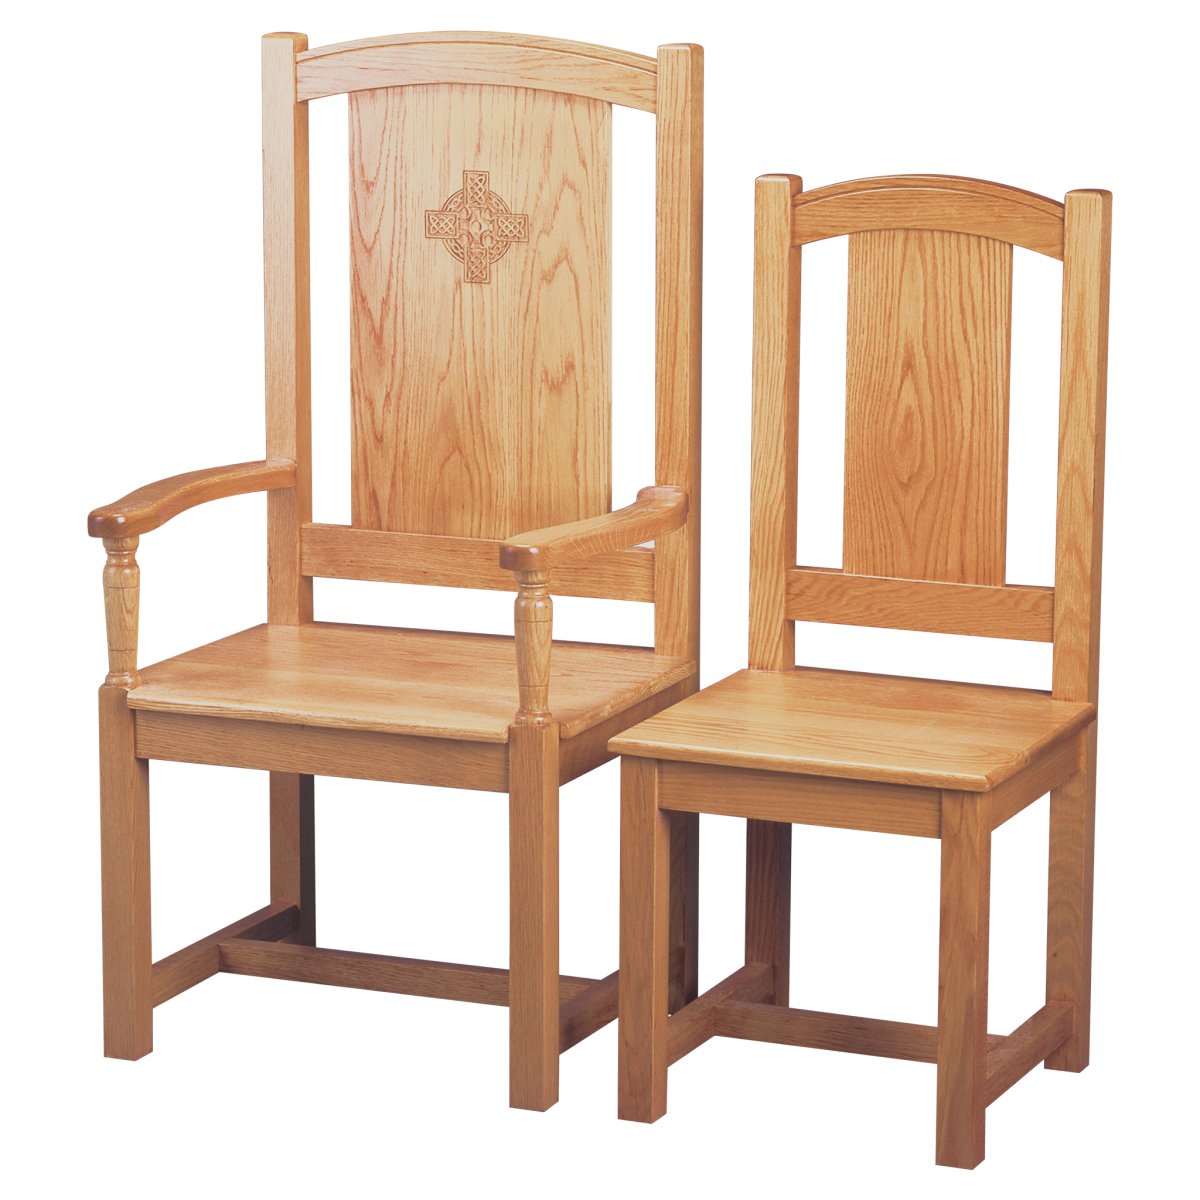 Celtic Cross Minister Chair - Hayes & Finch